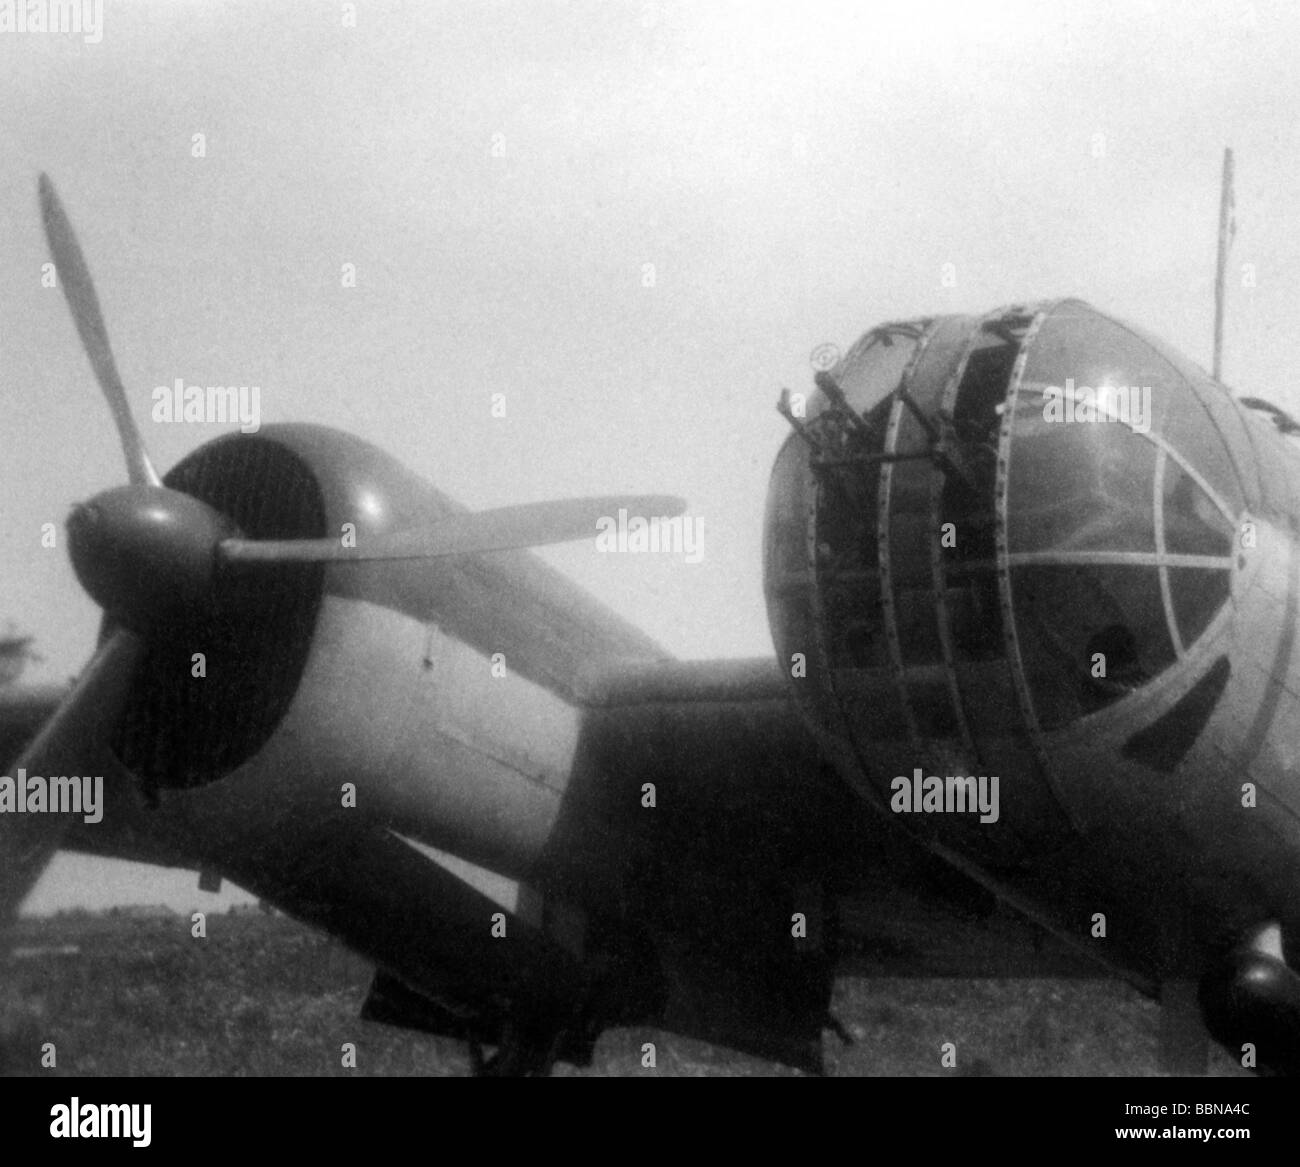 events, Second World War / WWII, aerial warfare, aircraft, crashed / damaged, Soviet bomber Tupolev ANT-40 (SB), captured by German troops after a forced landing, Dukhovshchina near Smolensk, Russia, 26.7.1941, detail, Stock Photo